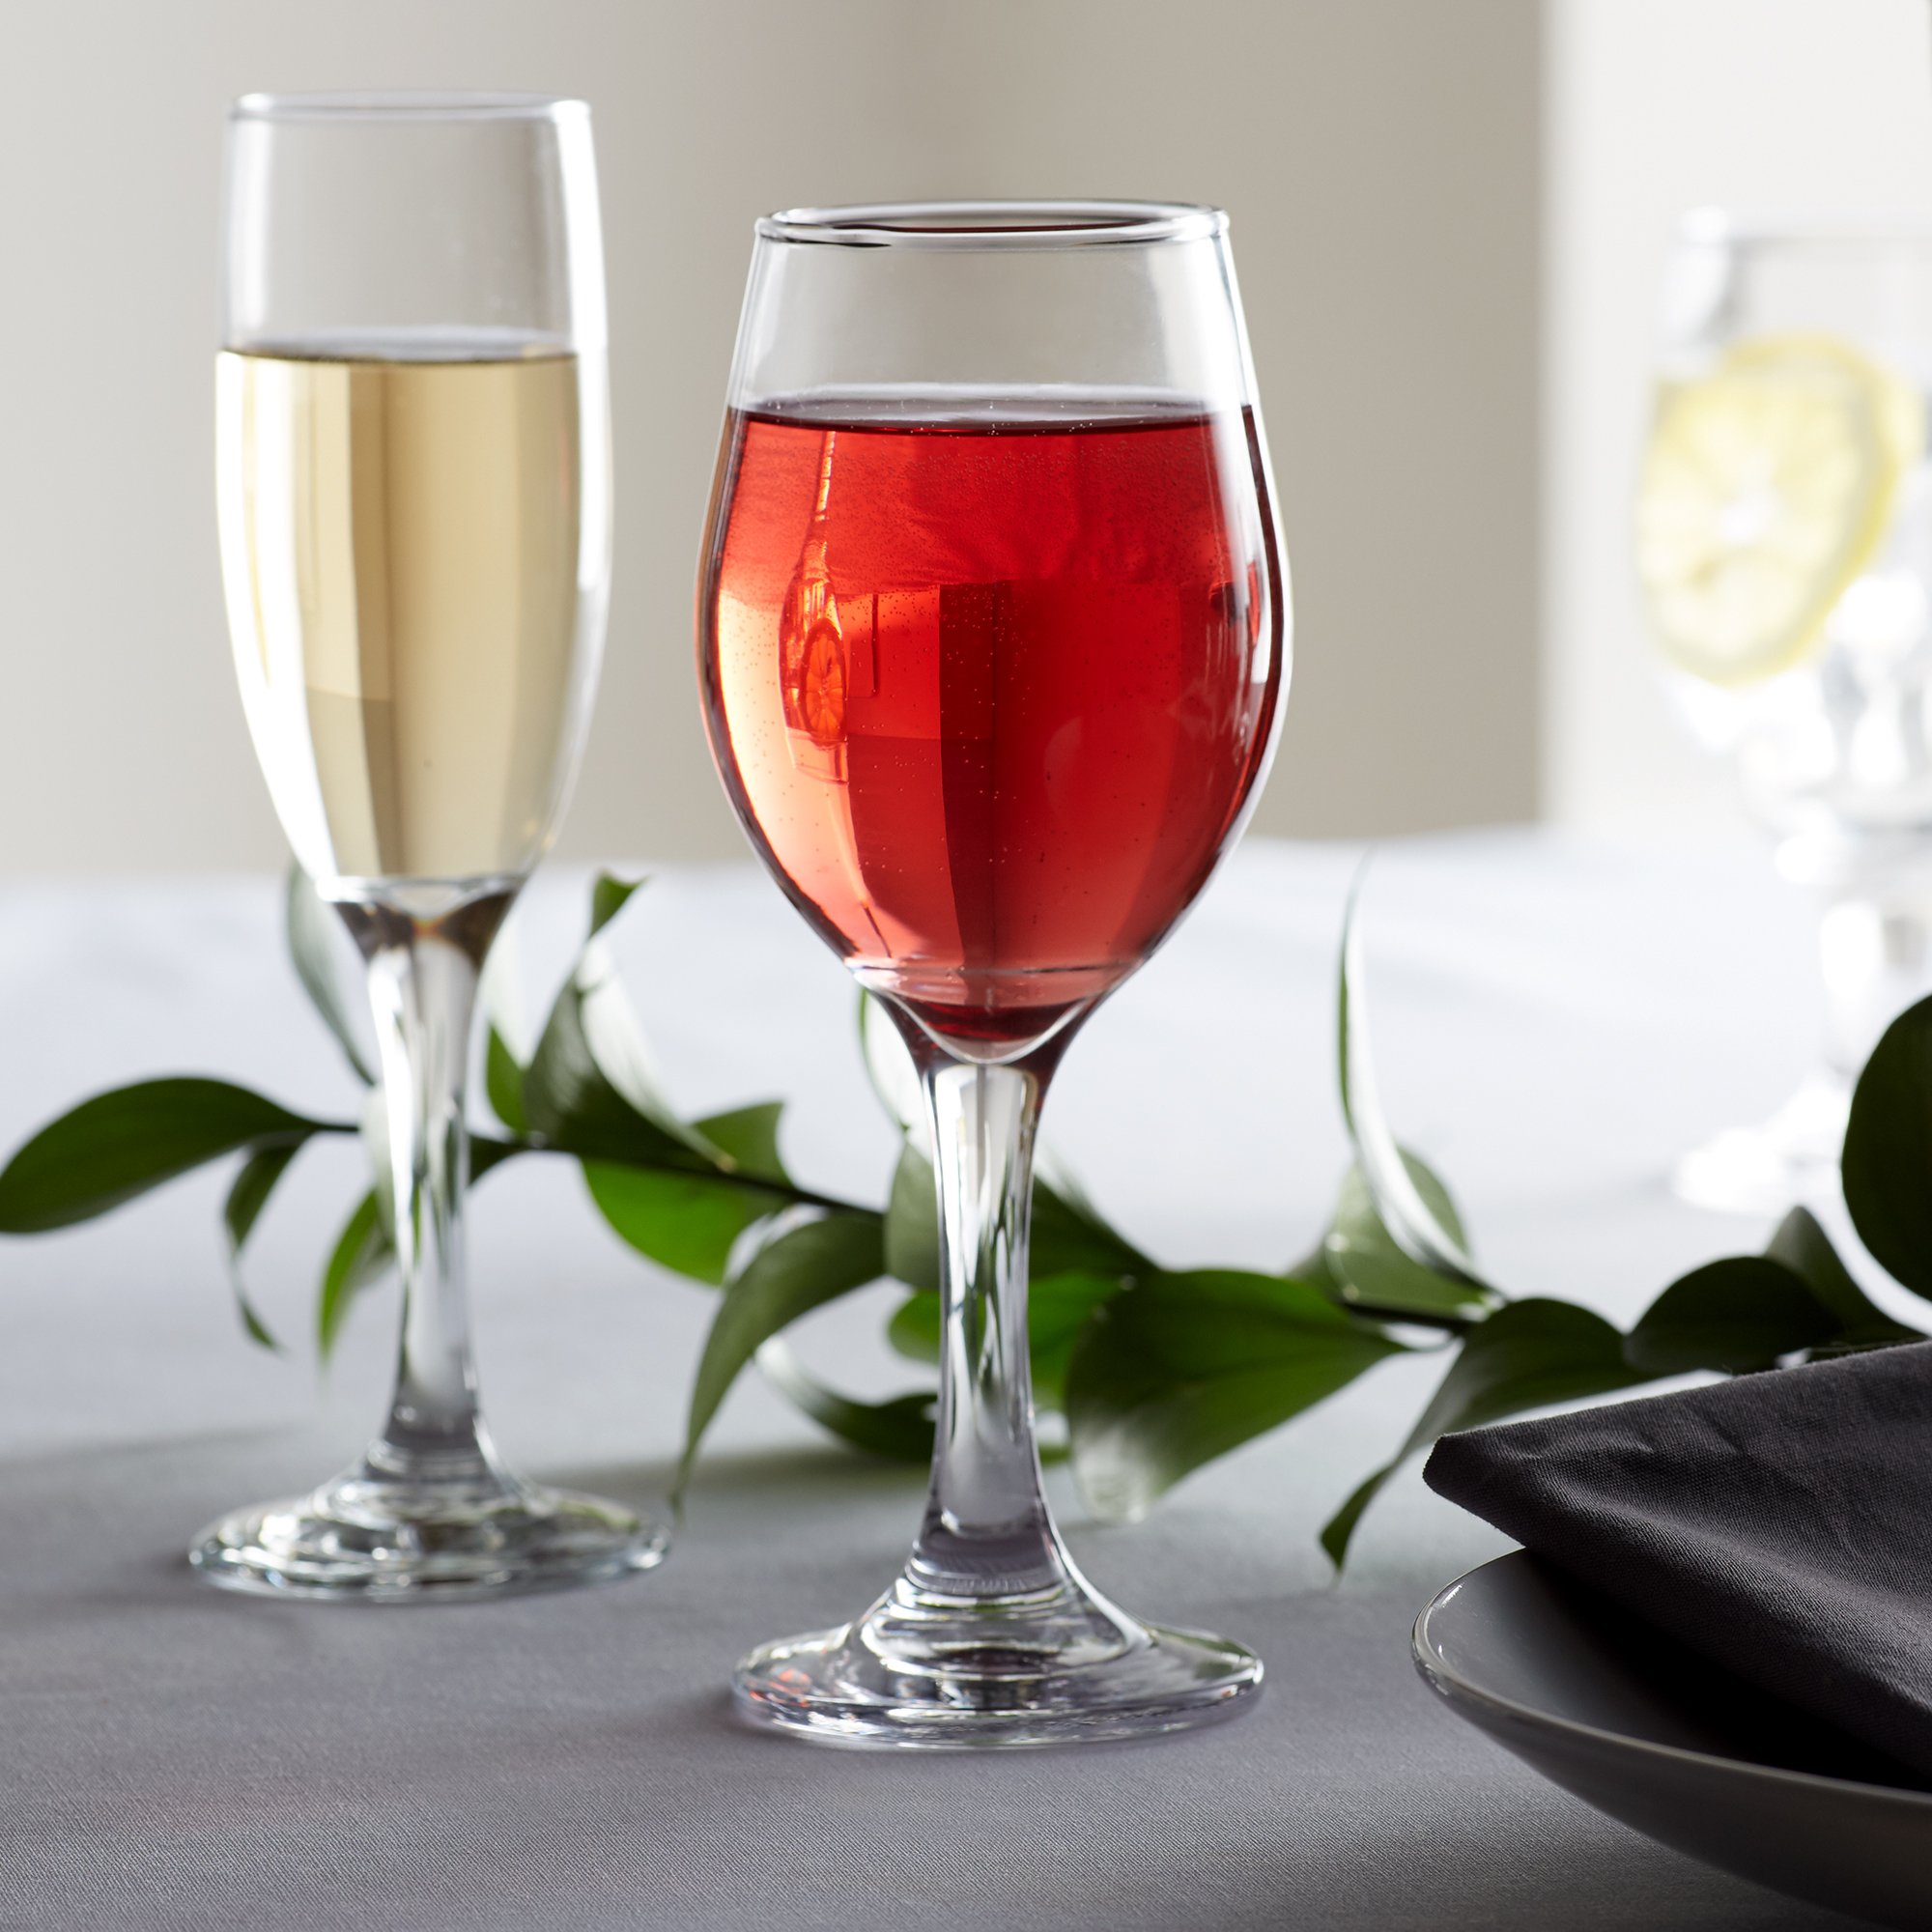 Two stemmed wine glasses filled with wine on an elegant table